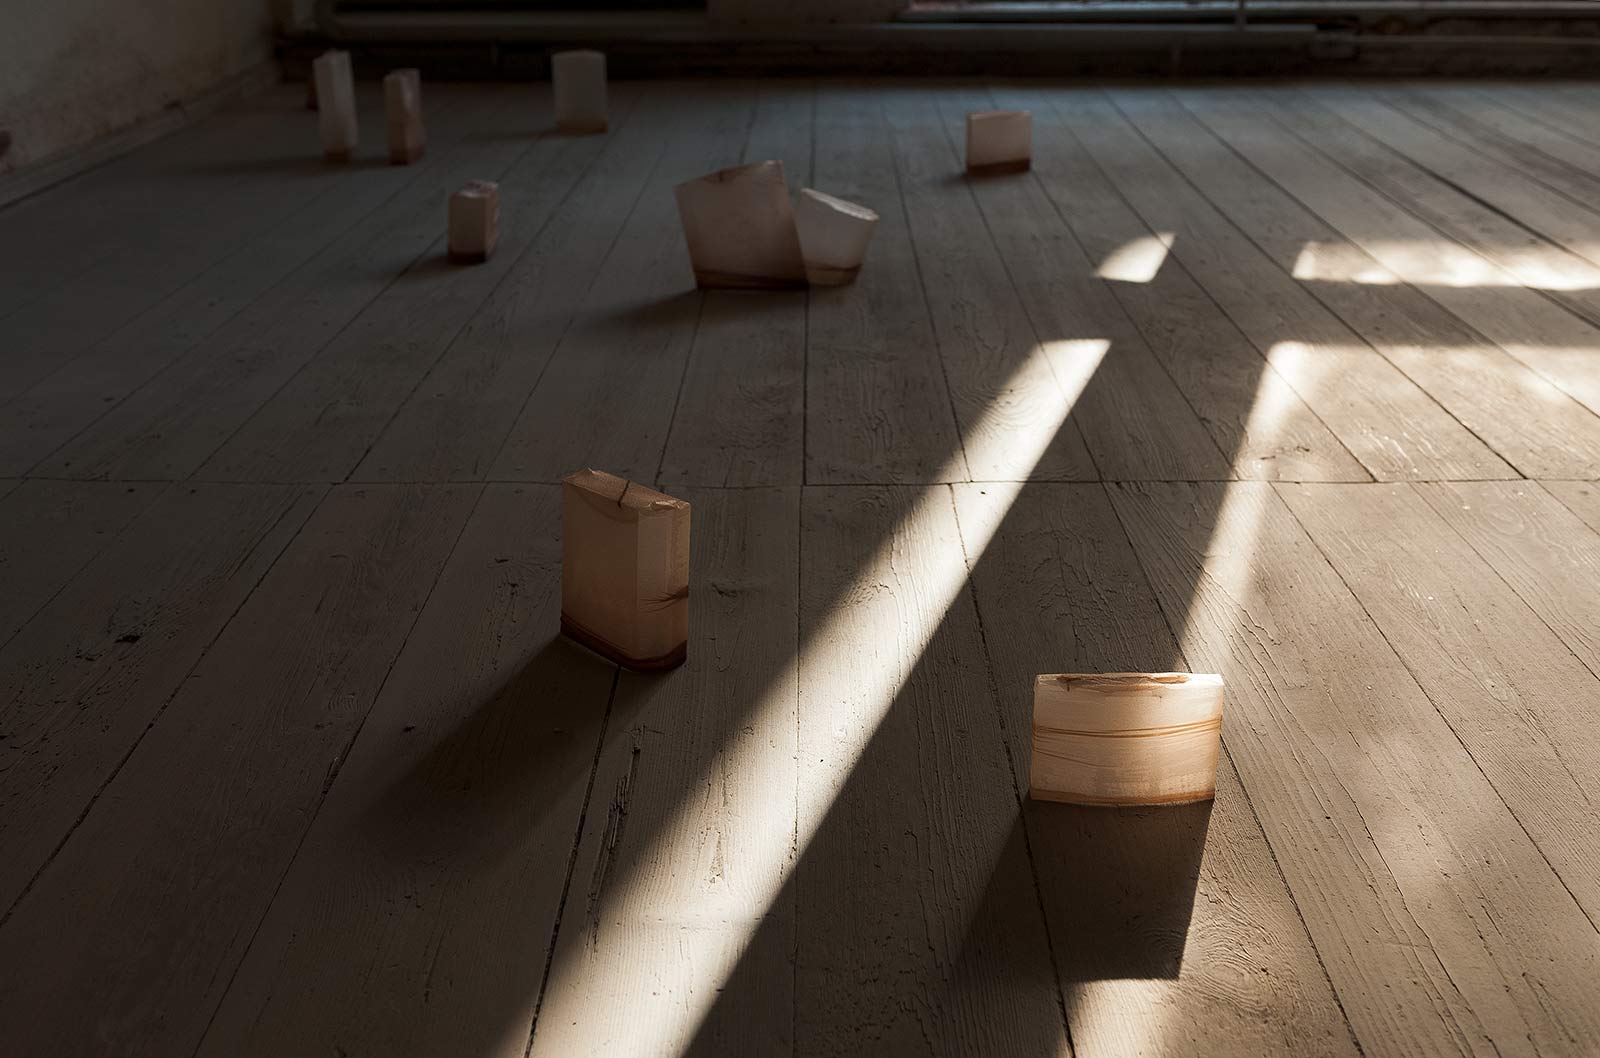 Installation view "shaped bodies" with evening sun shining in the former Jewish "Kaufhaus Adolph Totschek".